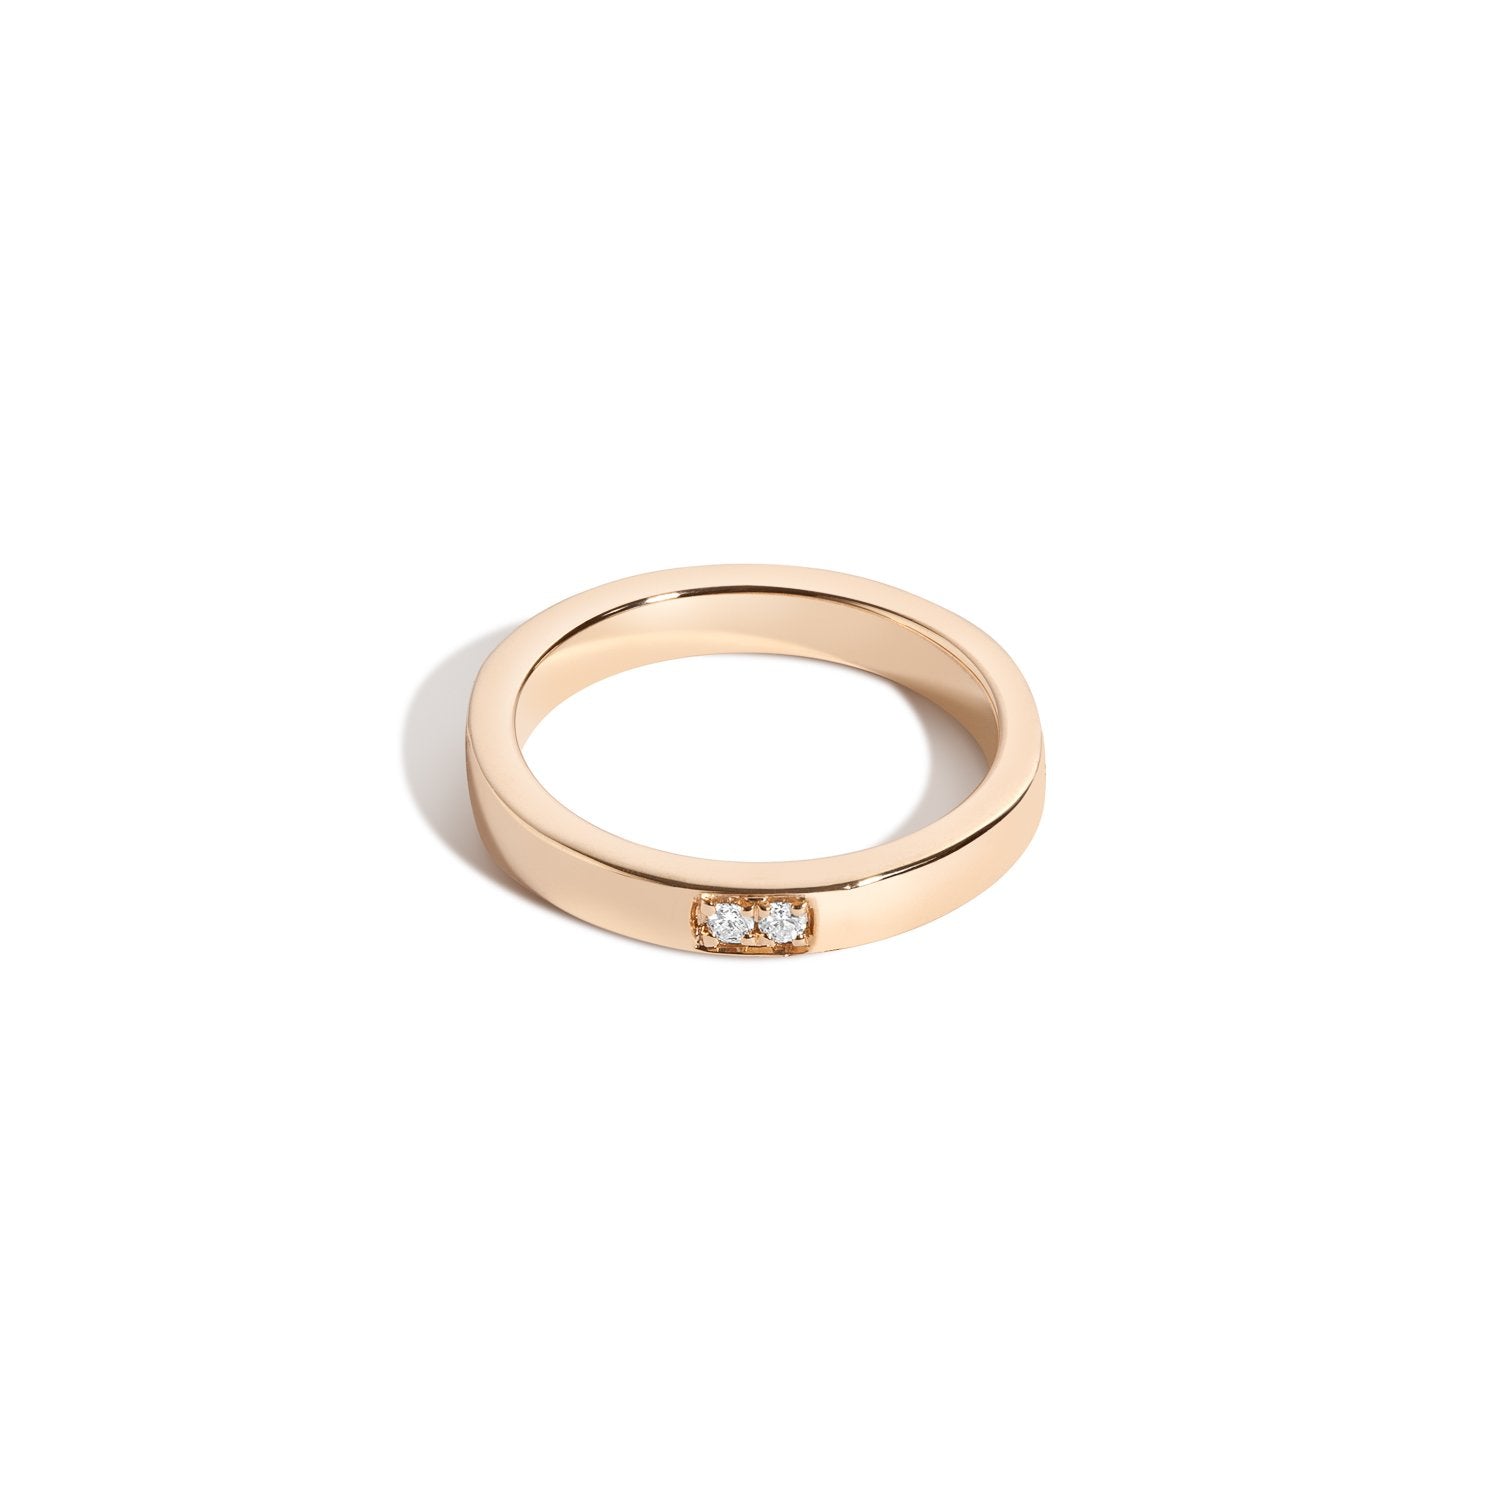 Shahla Karimi Jewelry Morse Code Series Ring 14K Yellow Gold - Letter "I"